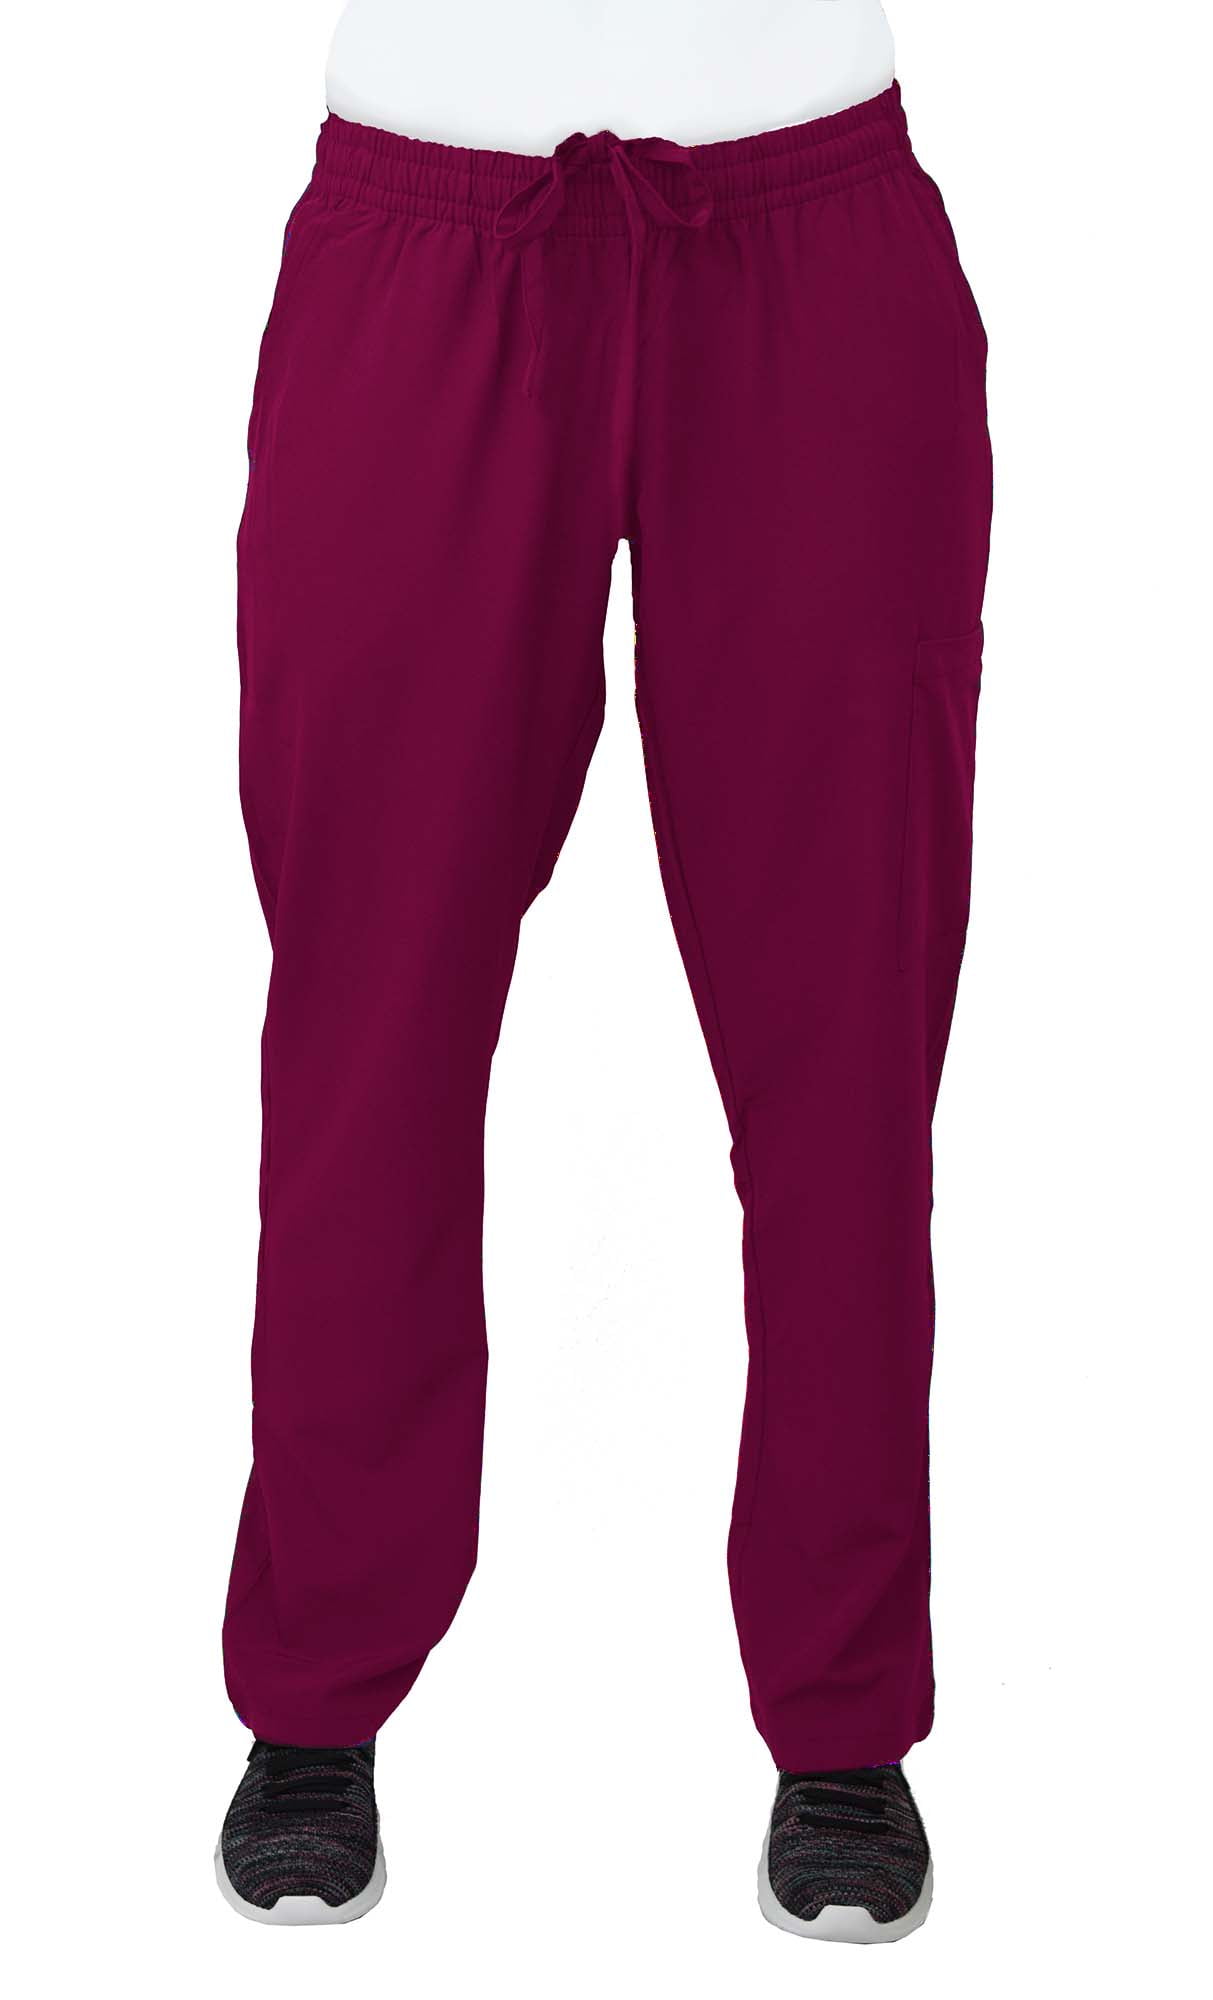 Womens Medical Scrub Set GT 4FLEX Vneck Top and Pant-Berry-Small 